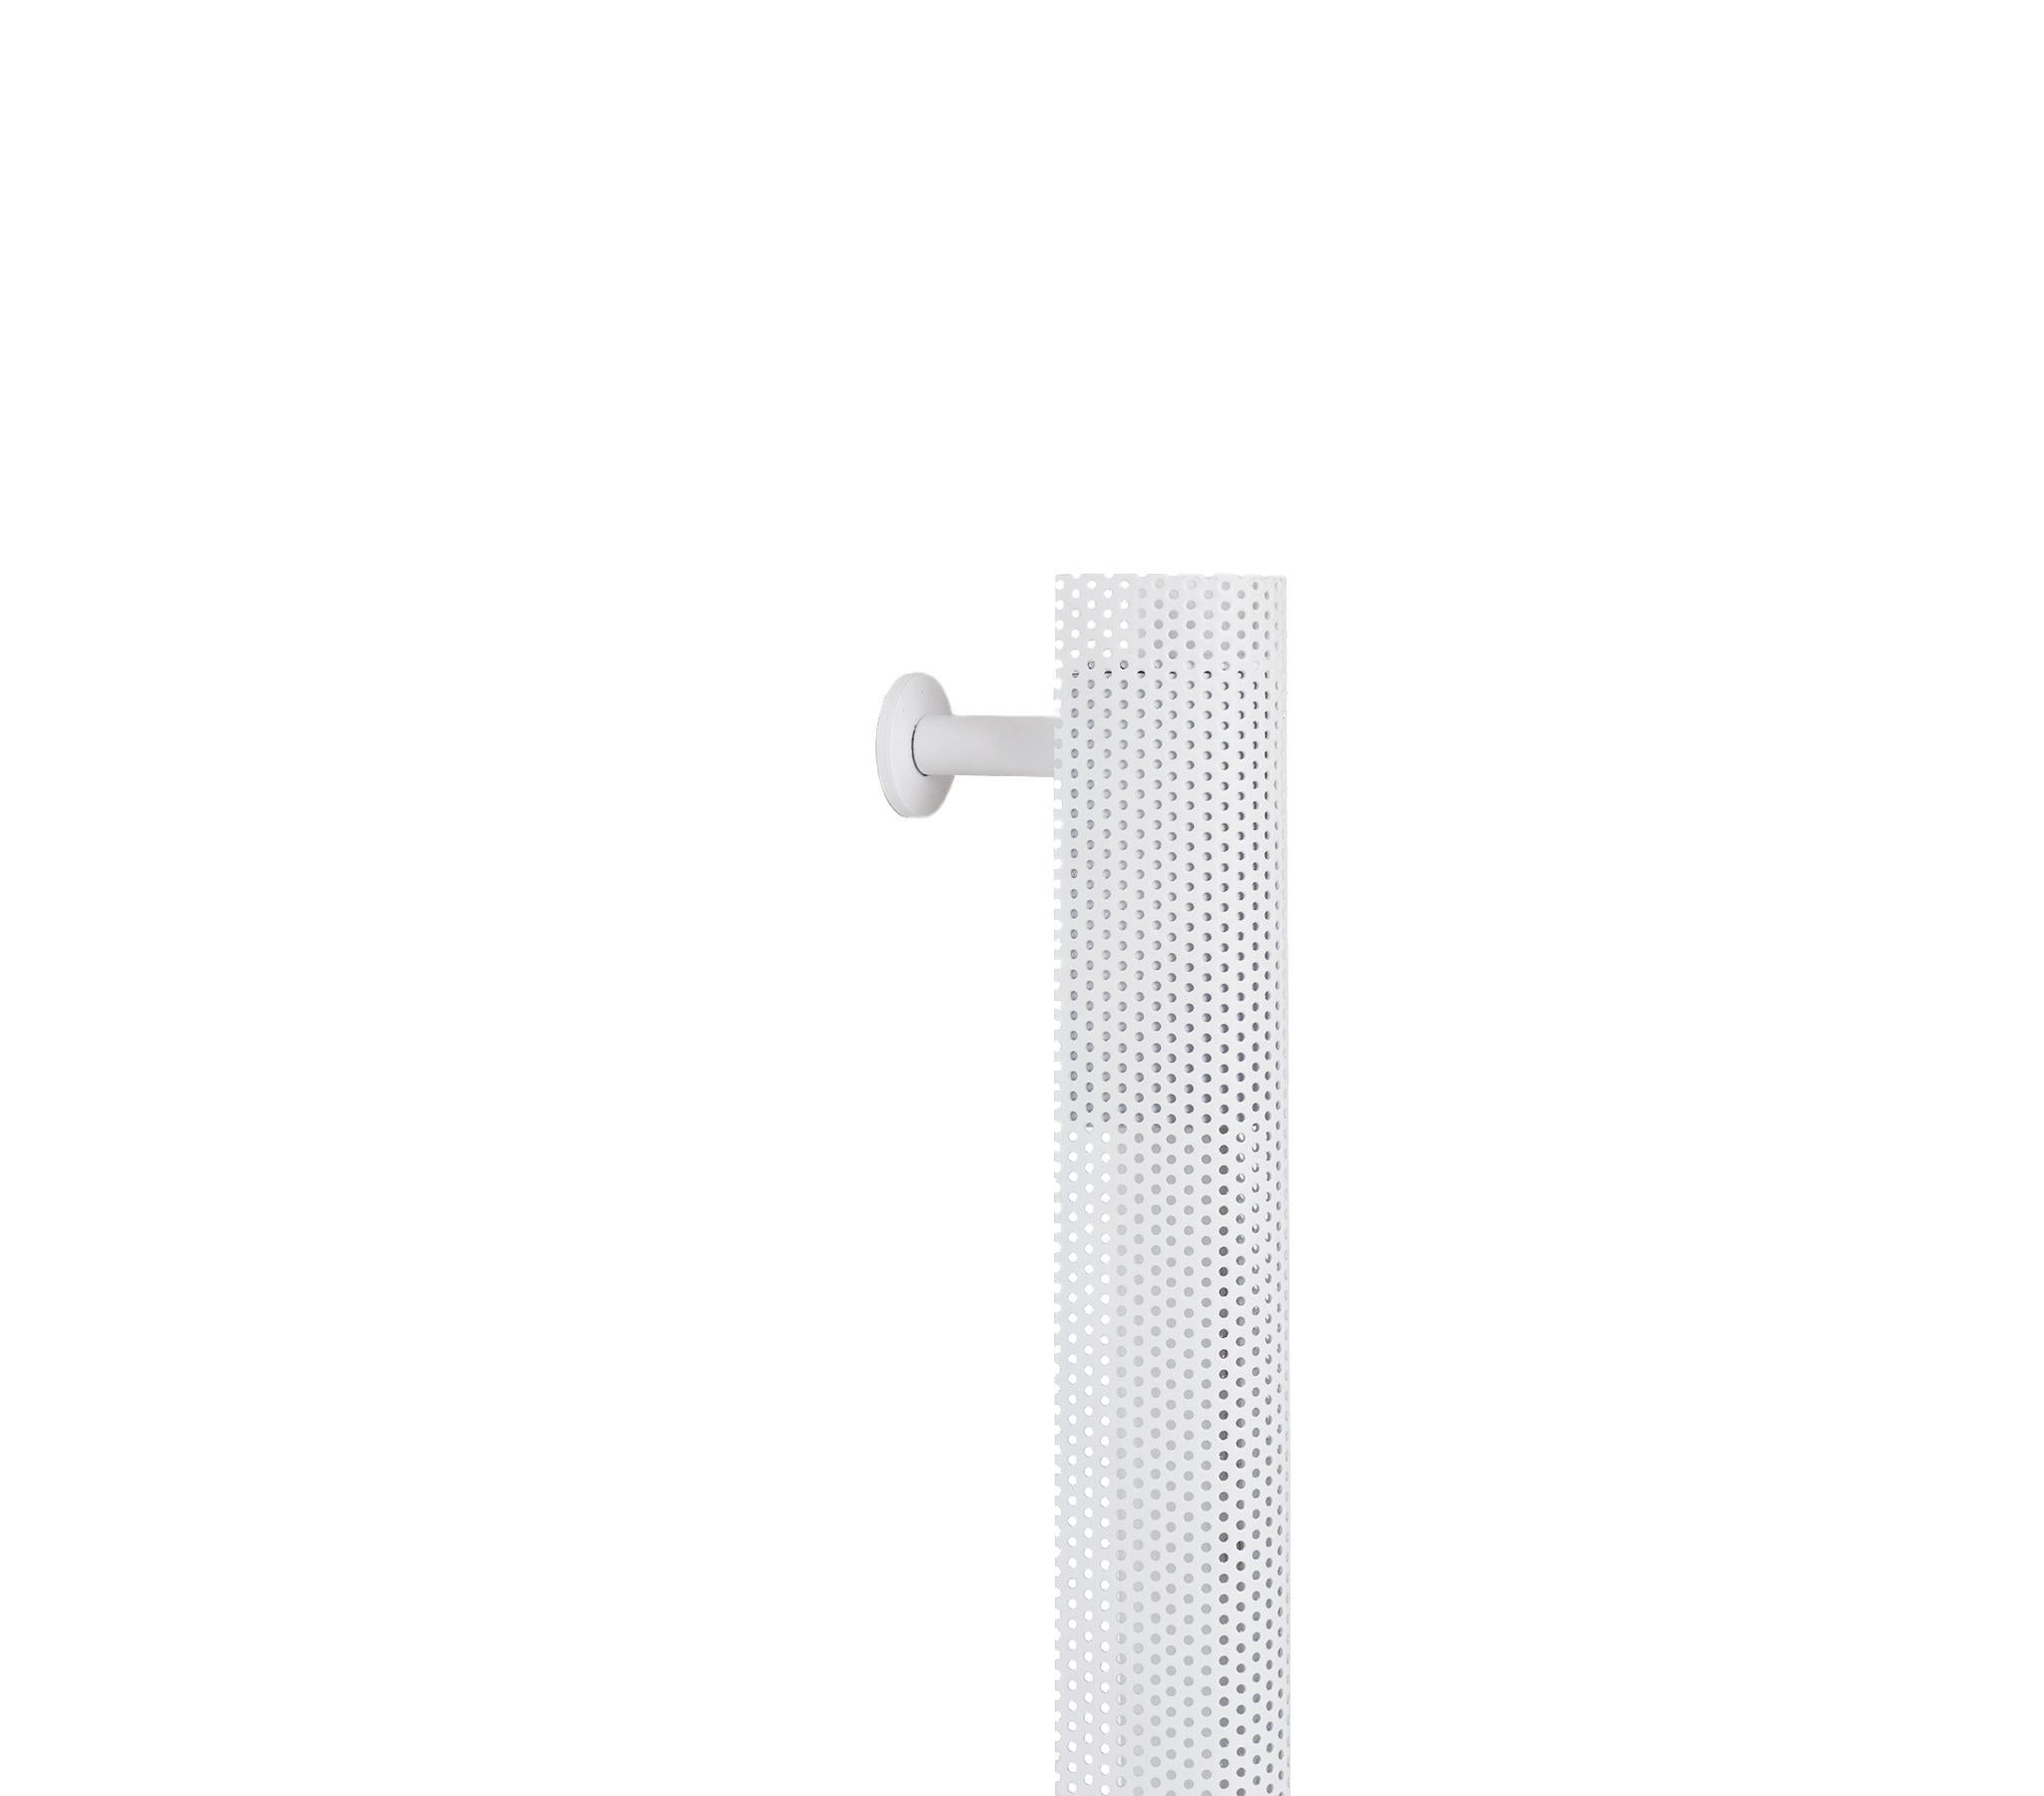 Scandinavian Modern Radent Wall Lamp in White, by NUAD For Sale